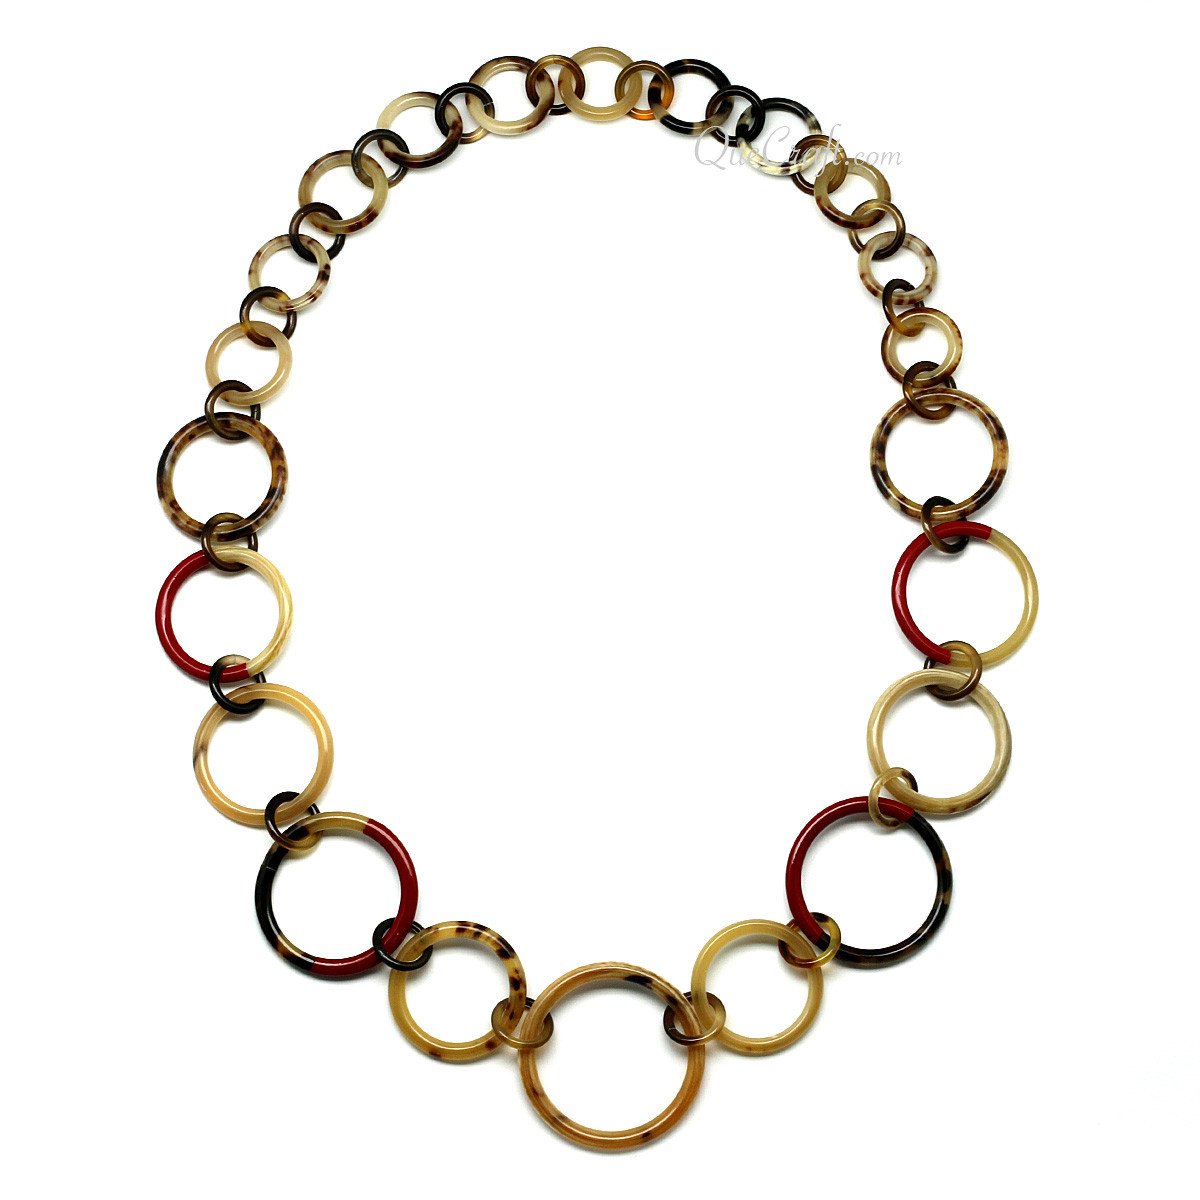 Horn & Lacquer Chain Necklace #11277 - HORN JEWELRY